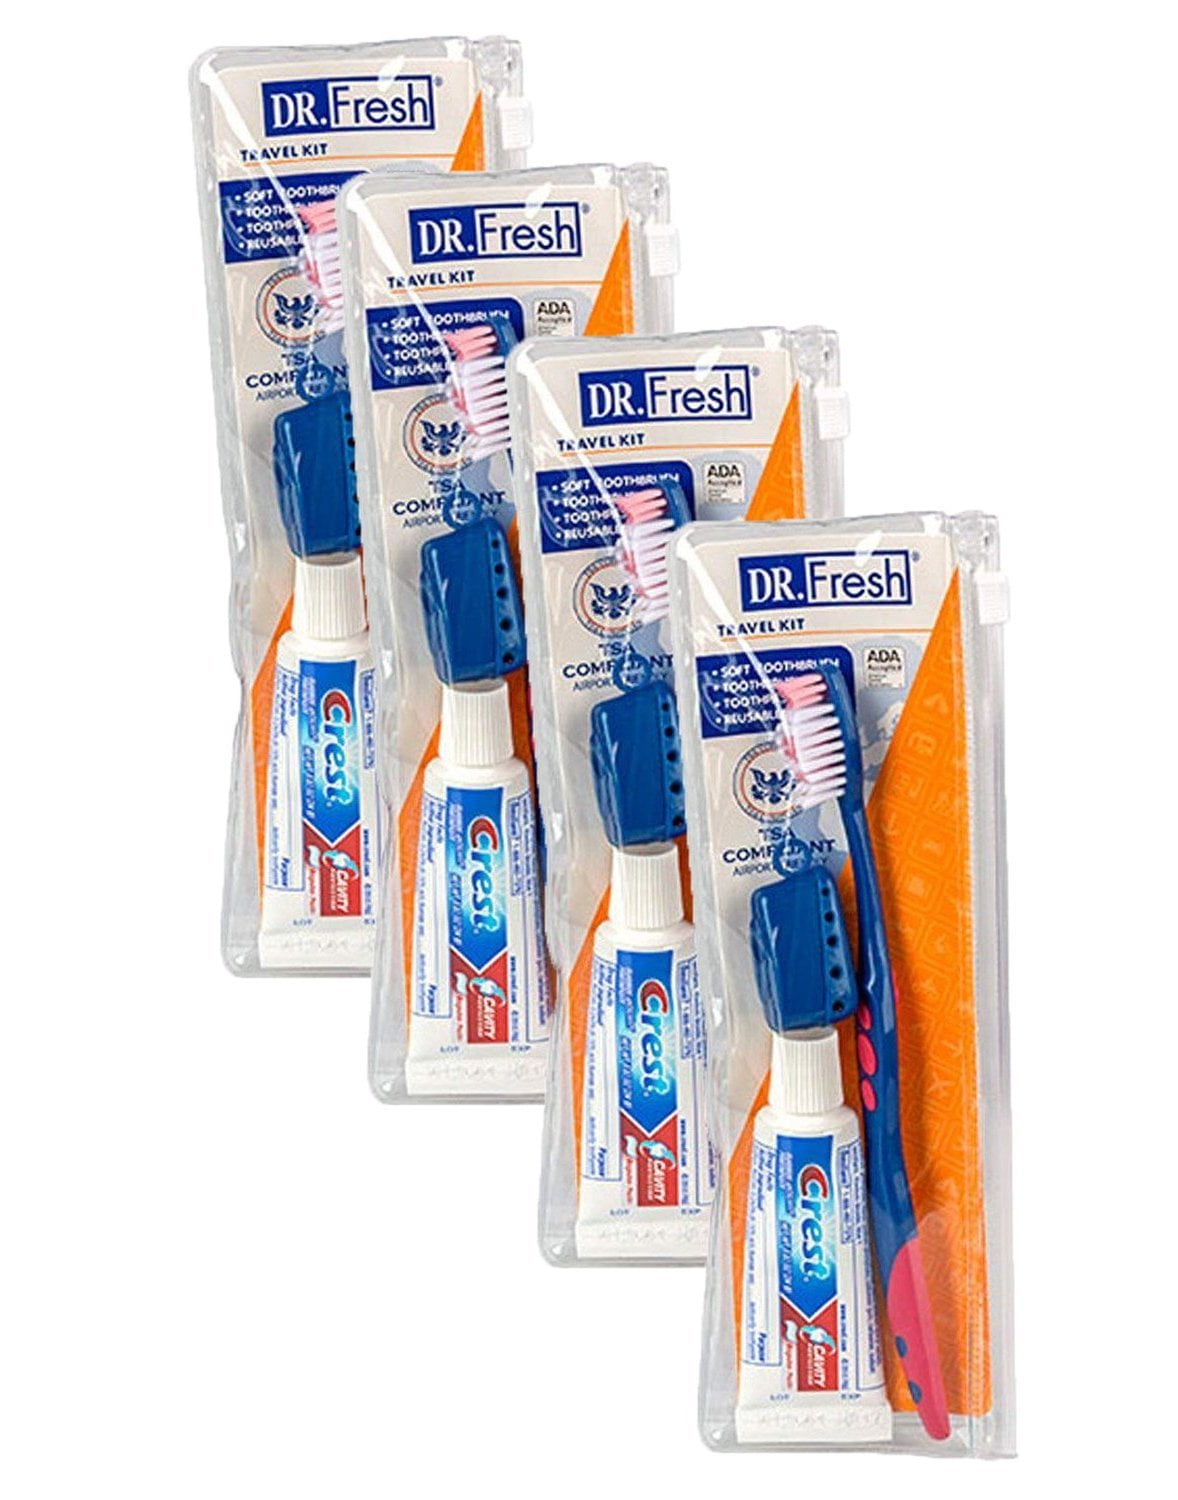 toothbrush & cover travel kit with colgate toothpaste